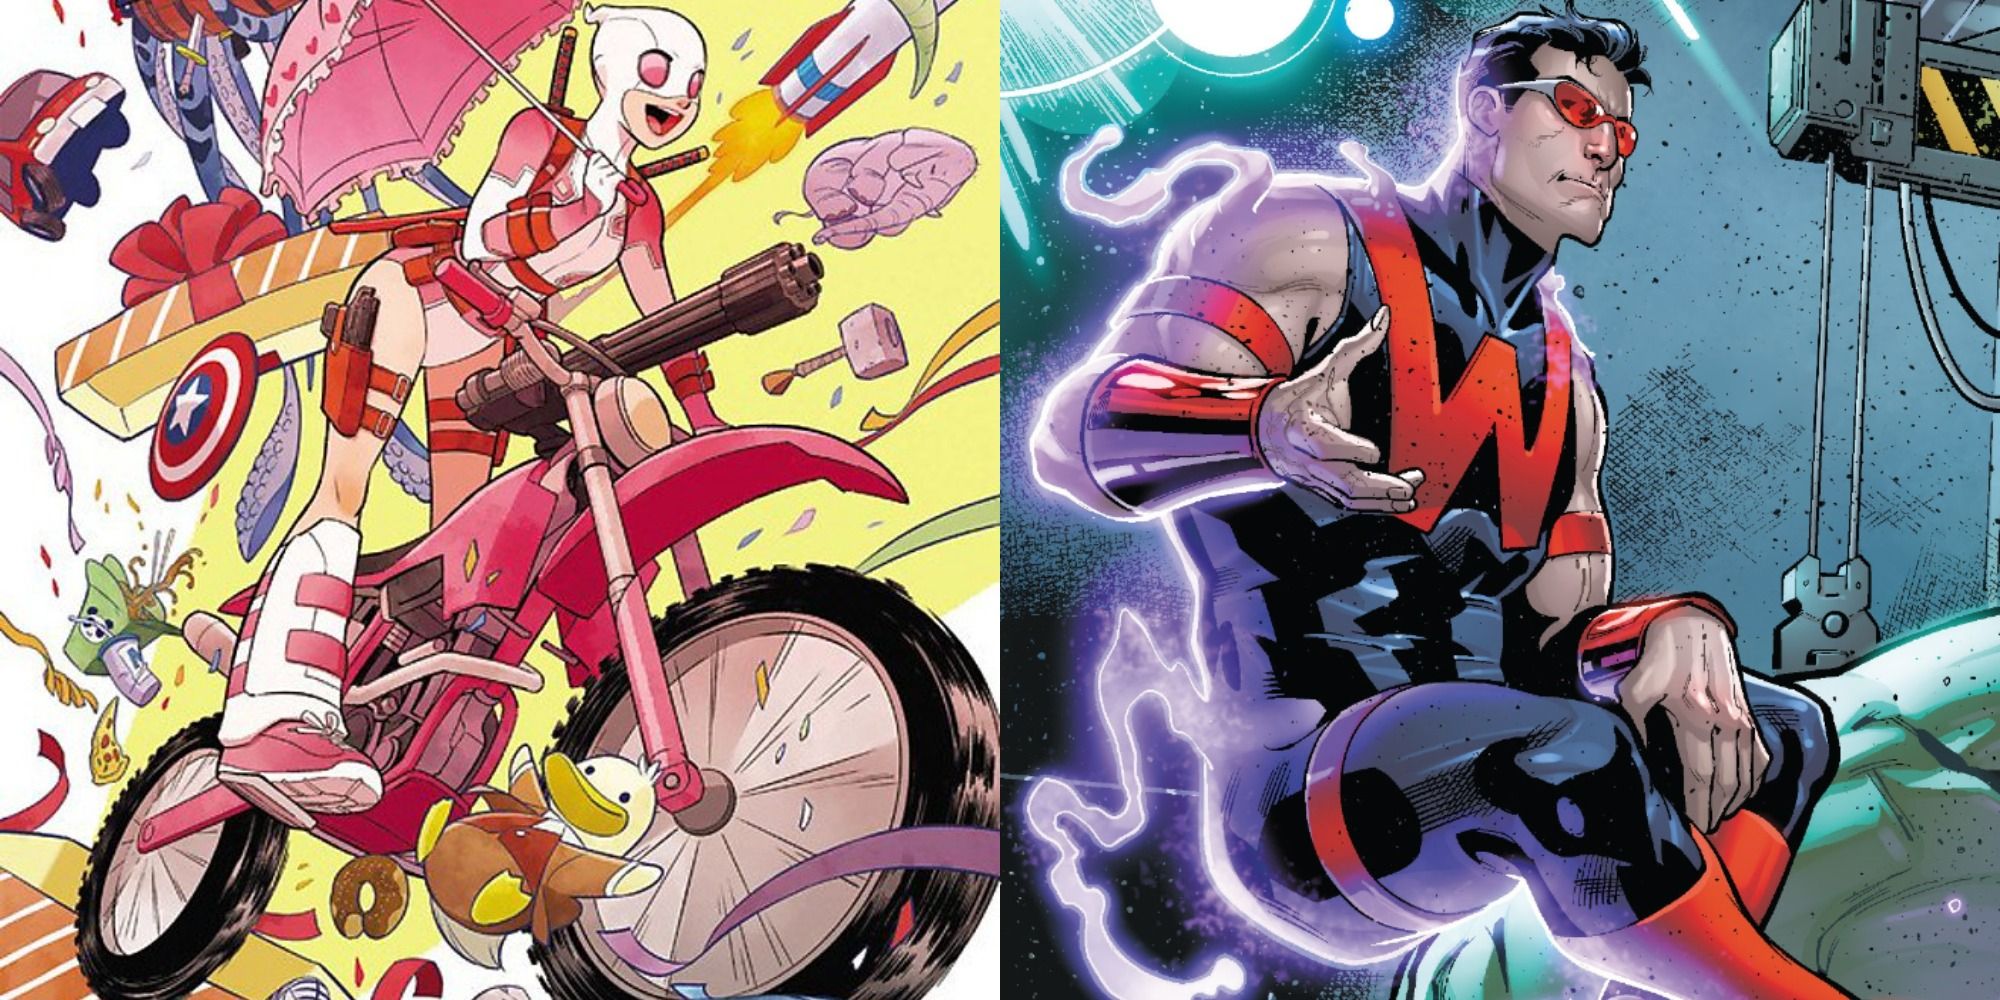 Split image showing Gwenpool and Power Man in Marvel Comics